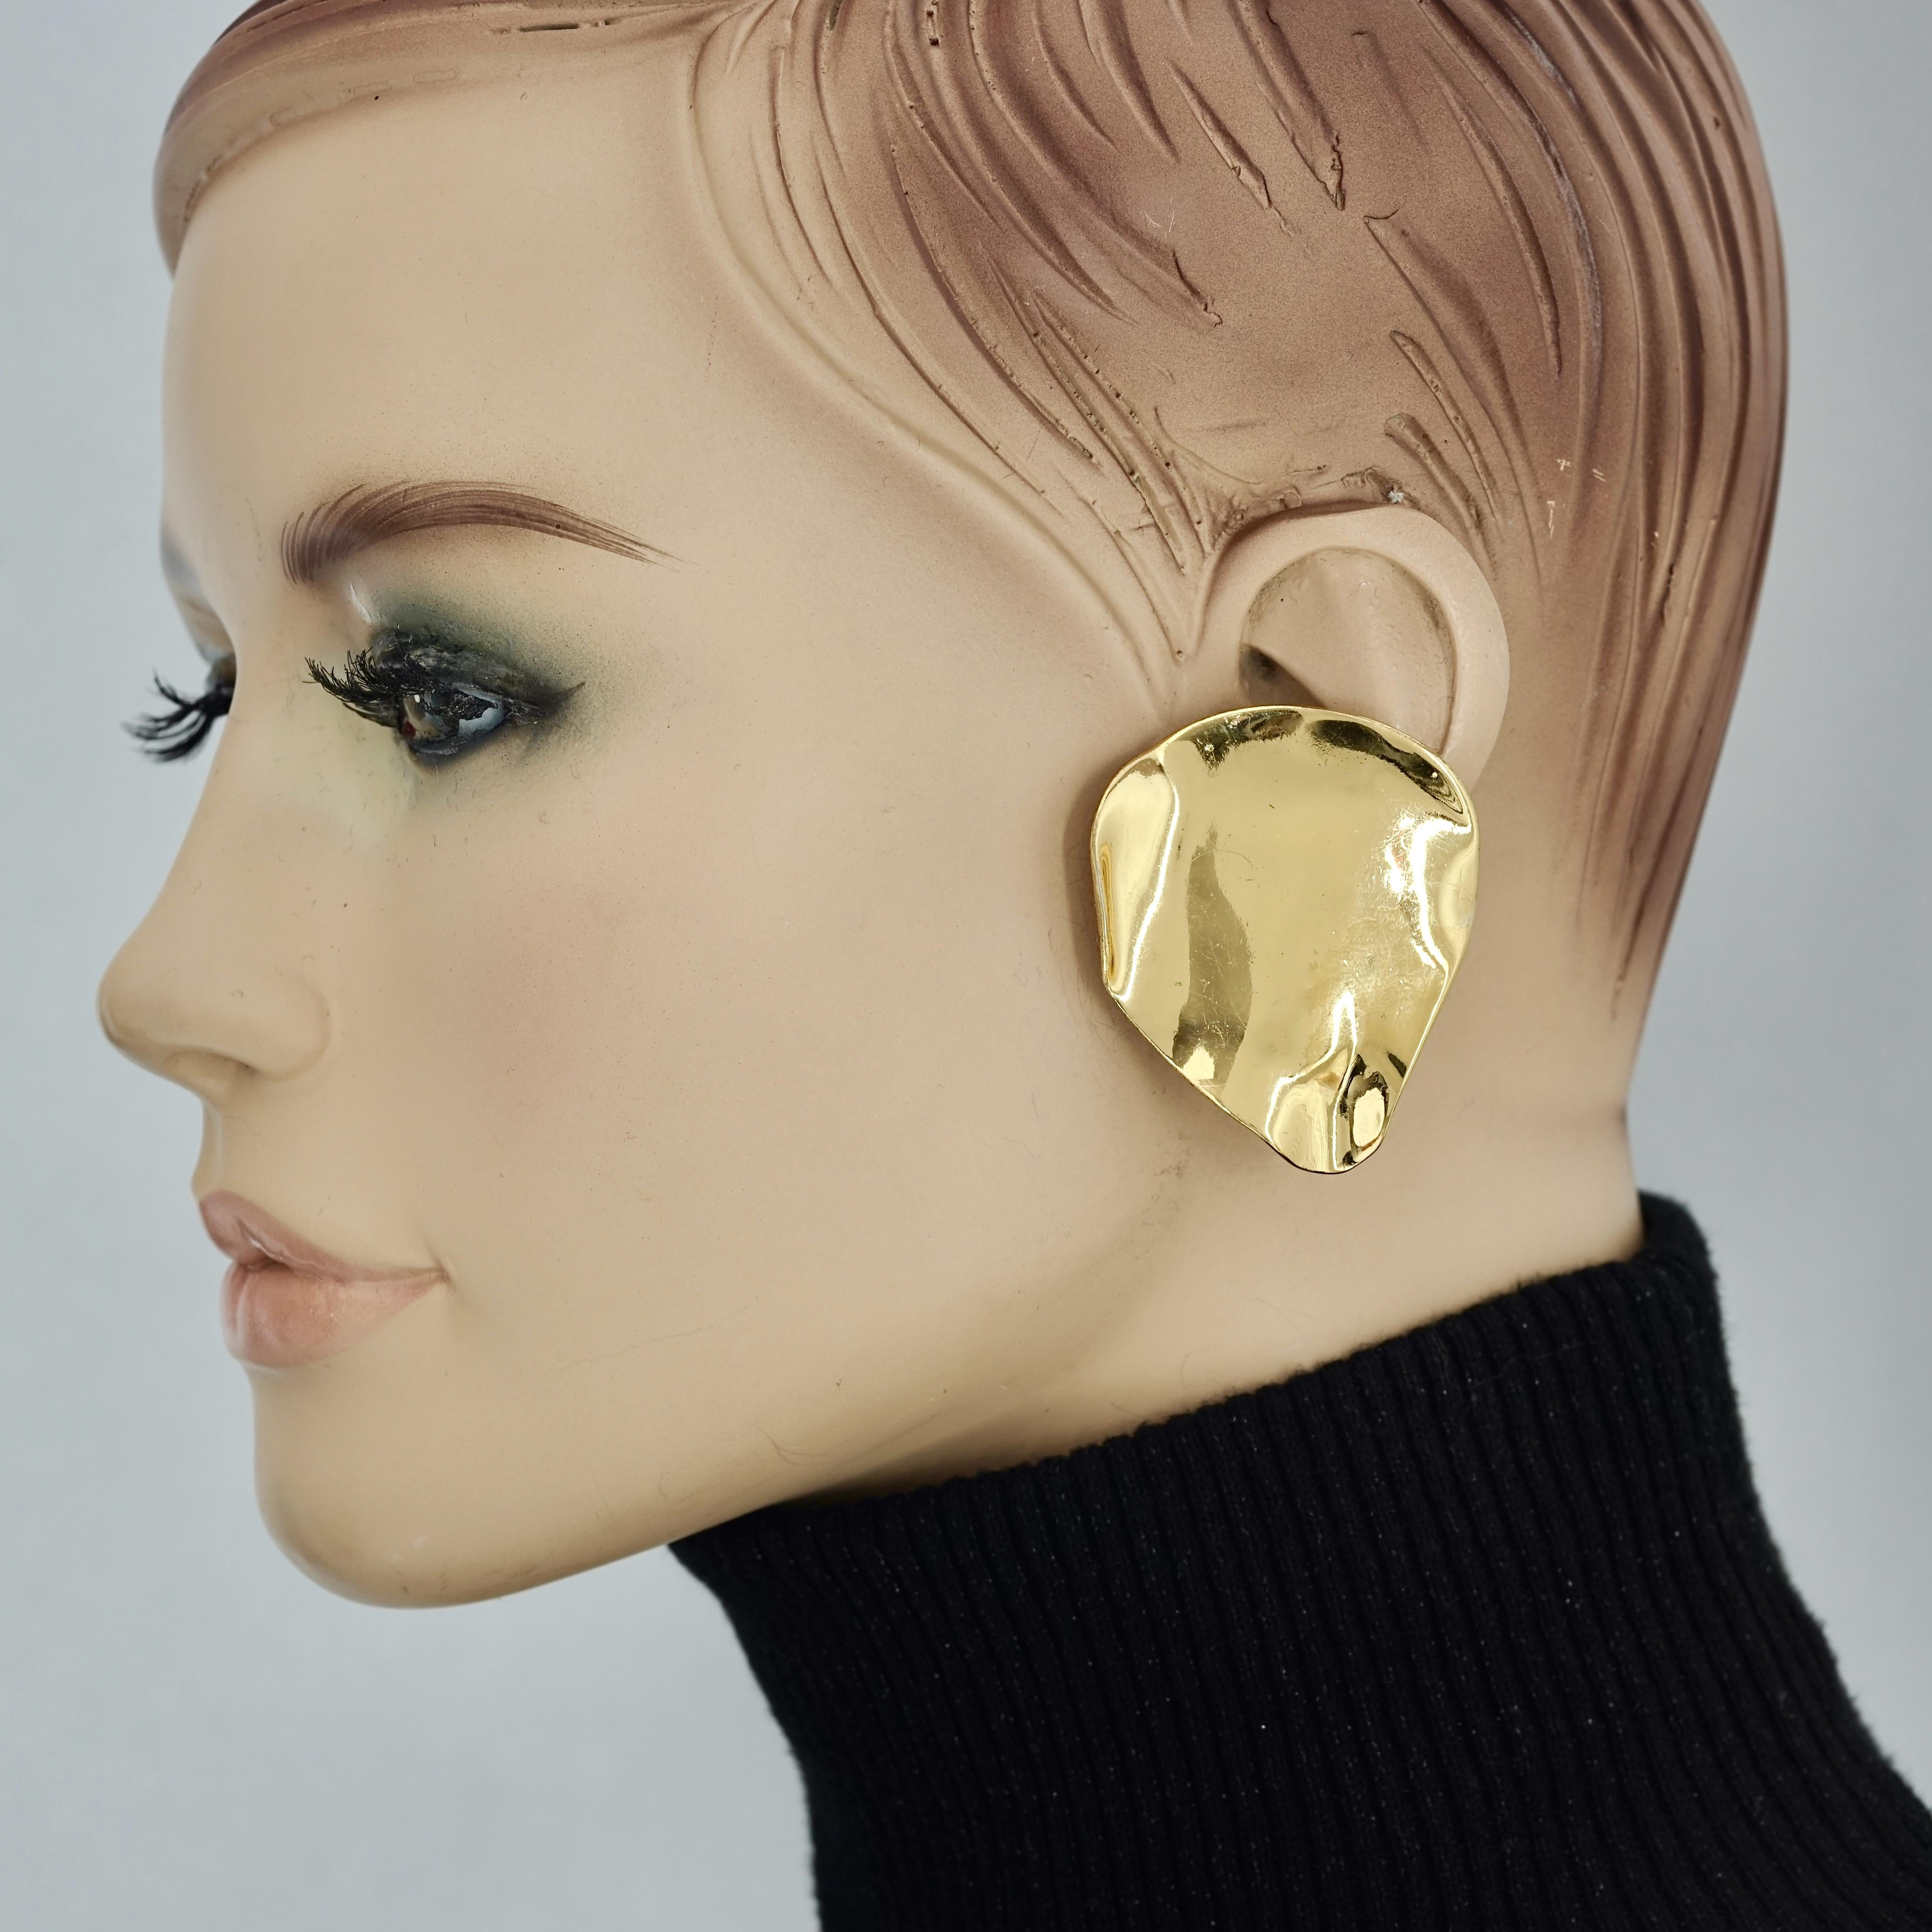 Vintage Massive YVES SAINT LAURENT Ysl Asymmetric Earrings

Measurements:
Height: 1.96 inches (5 cm)
Width: 1.57 inches (4 cm)
Weight per Earring: 14 grams

Features:
- 100% Authentic YVES SAINT LAURENT.
- Massive asymmetric earrings in satin smooth